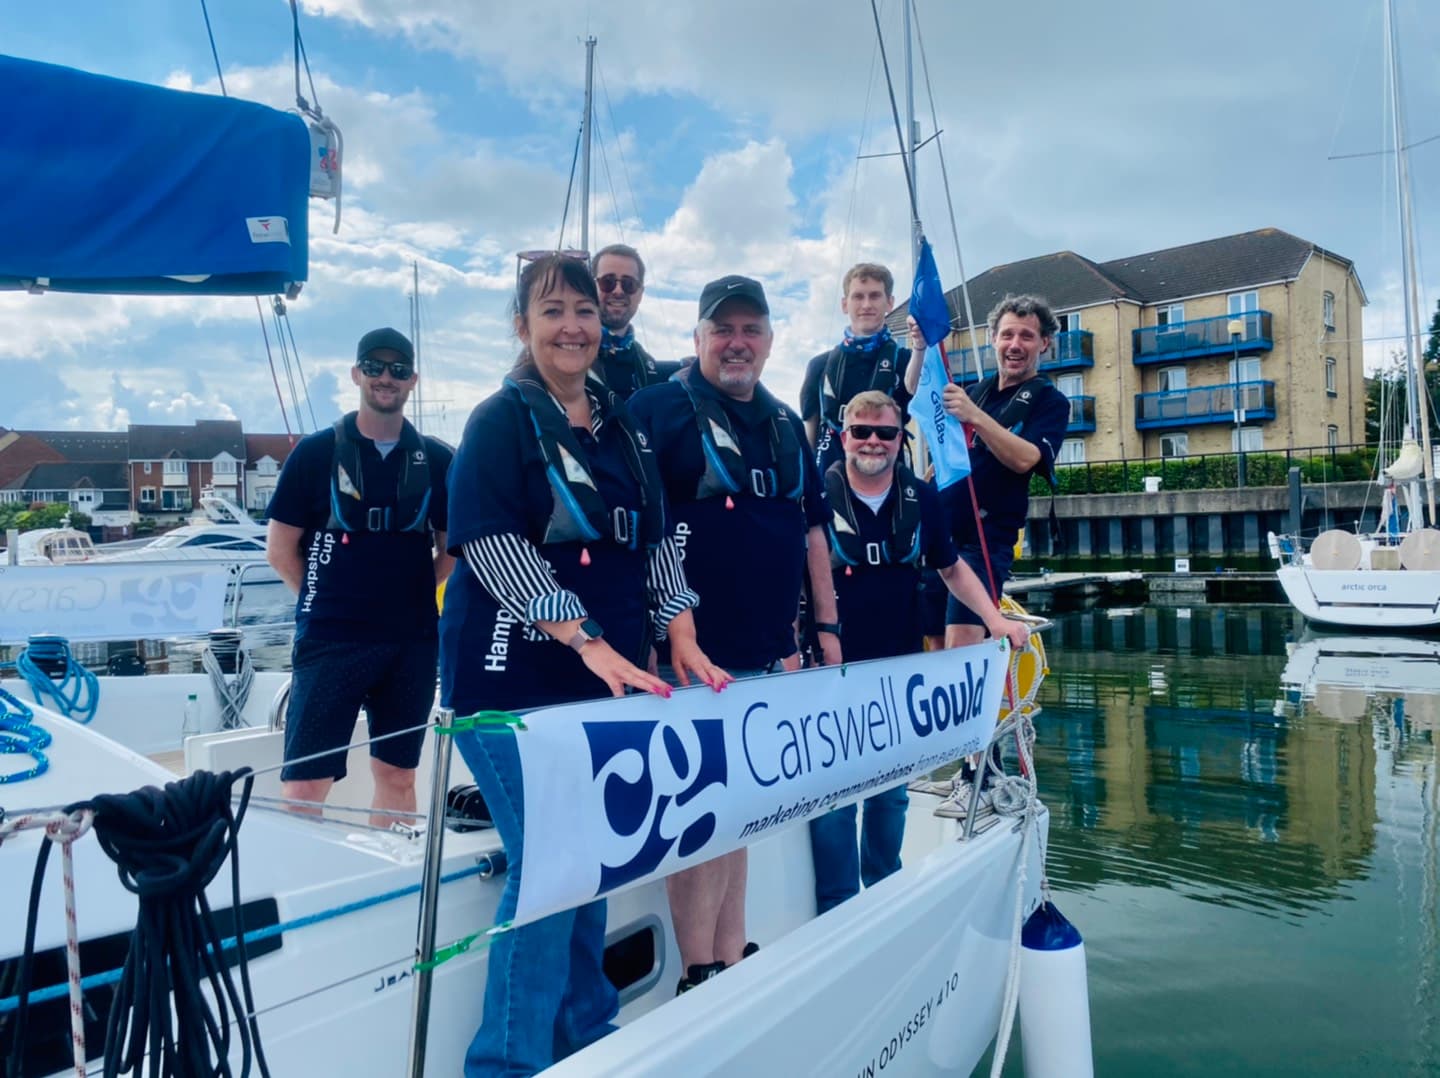 Marketing leaders take to the high seas in Southampton Sailing Week's Gallagher Cup